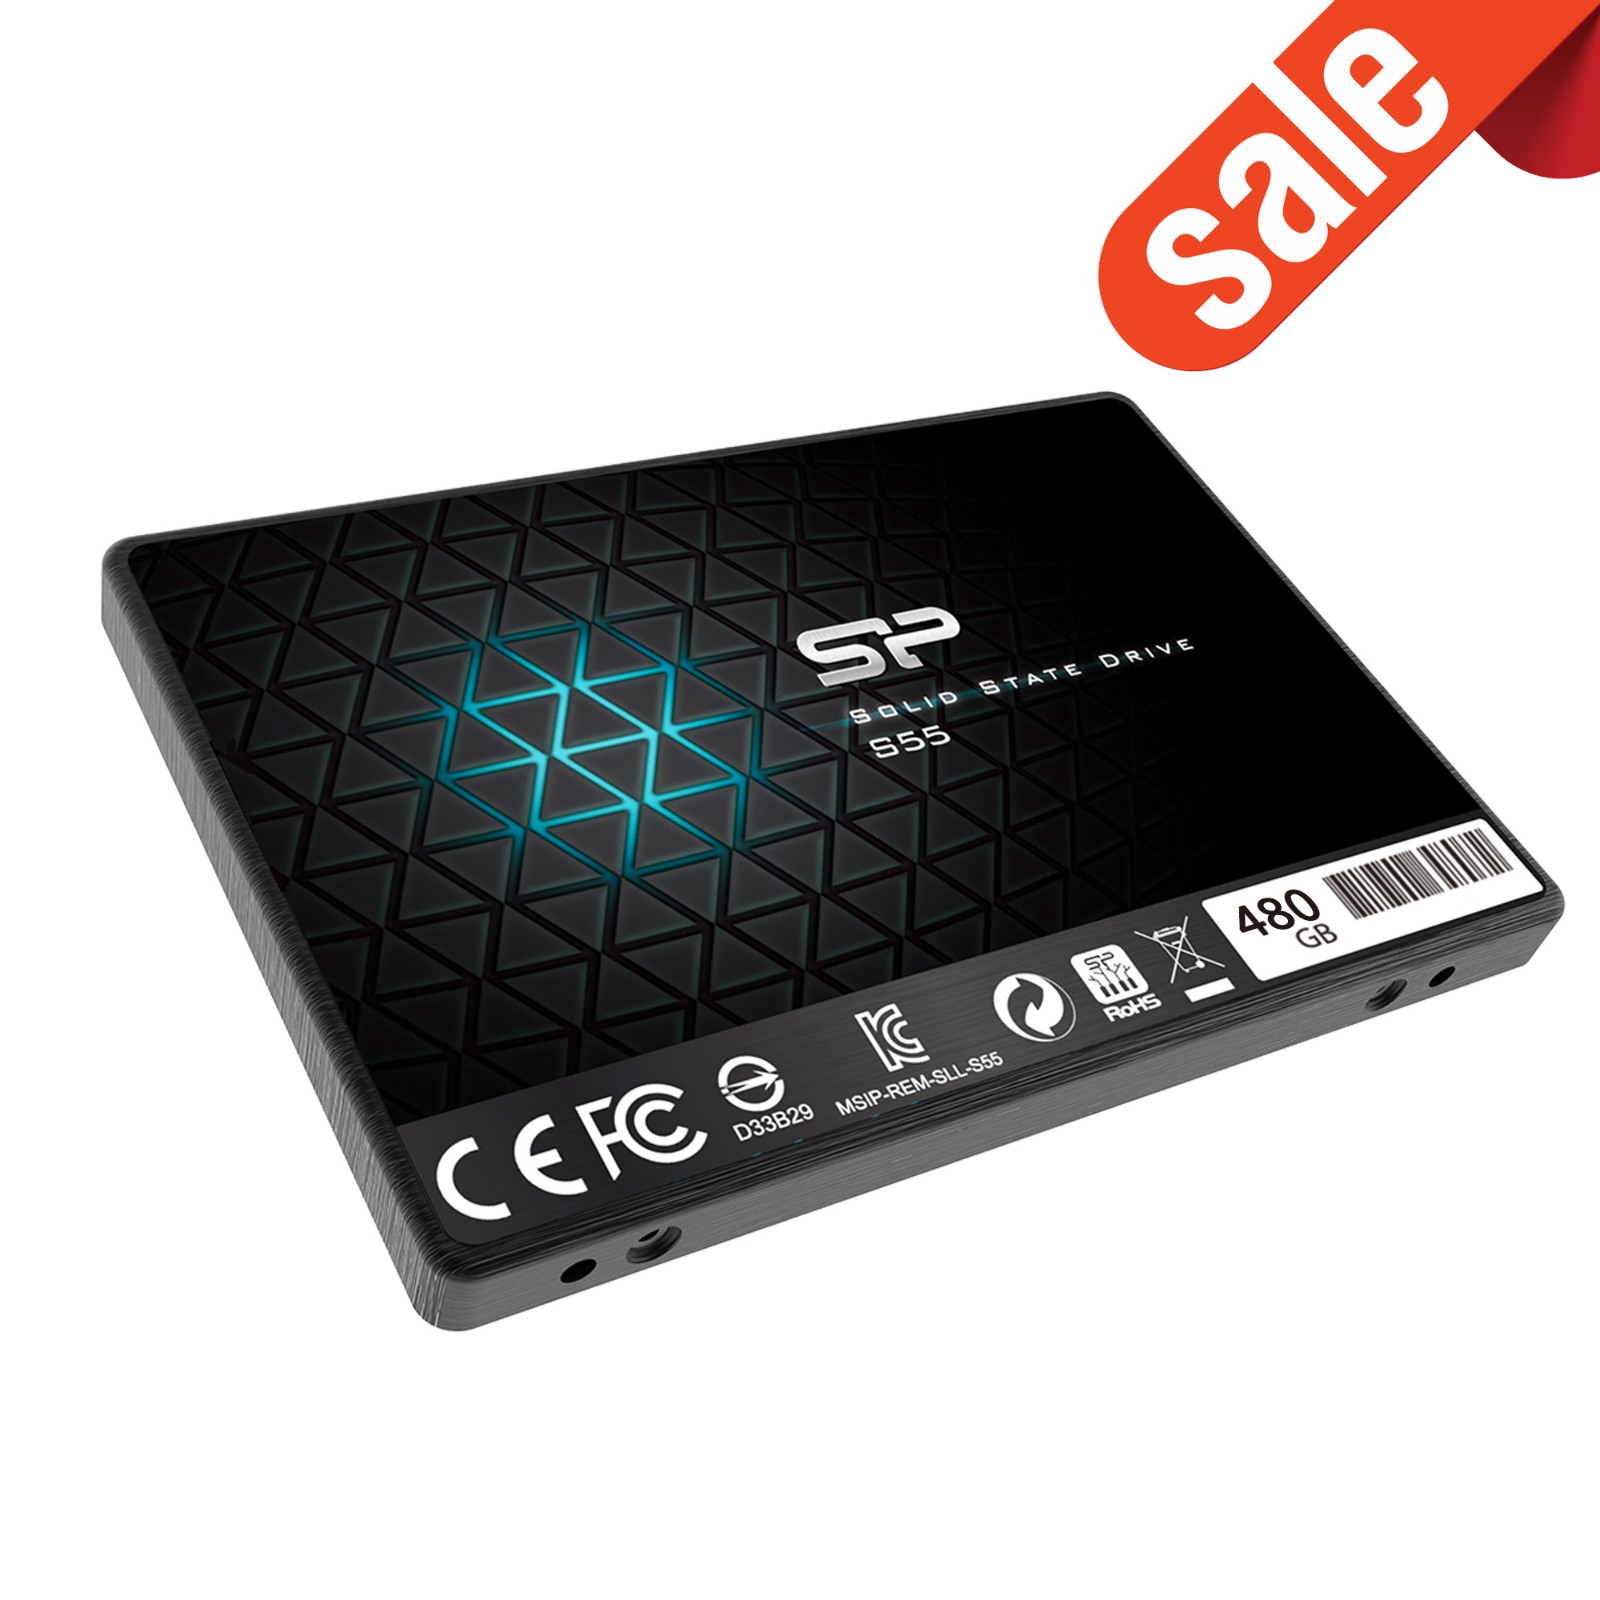 Silicon Power 480GB S55 SSD